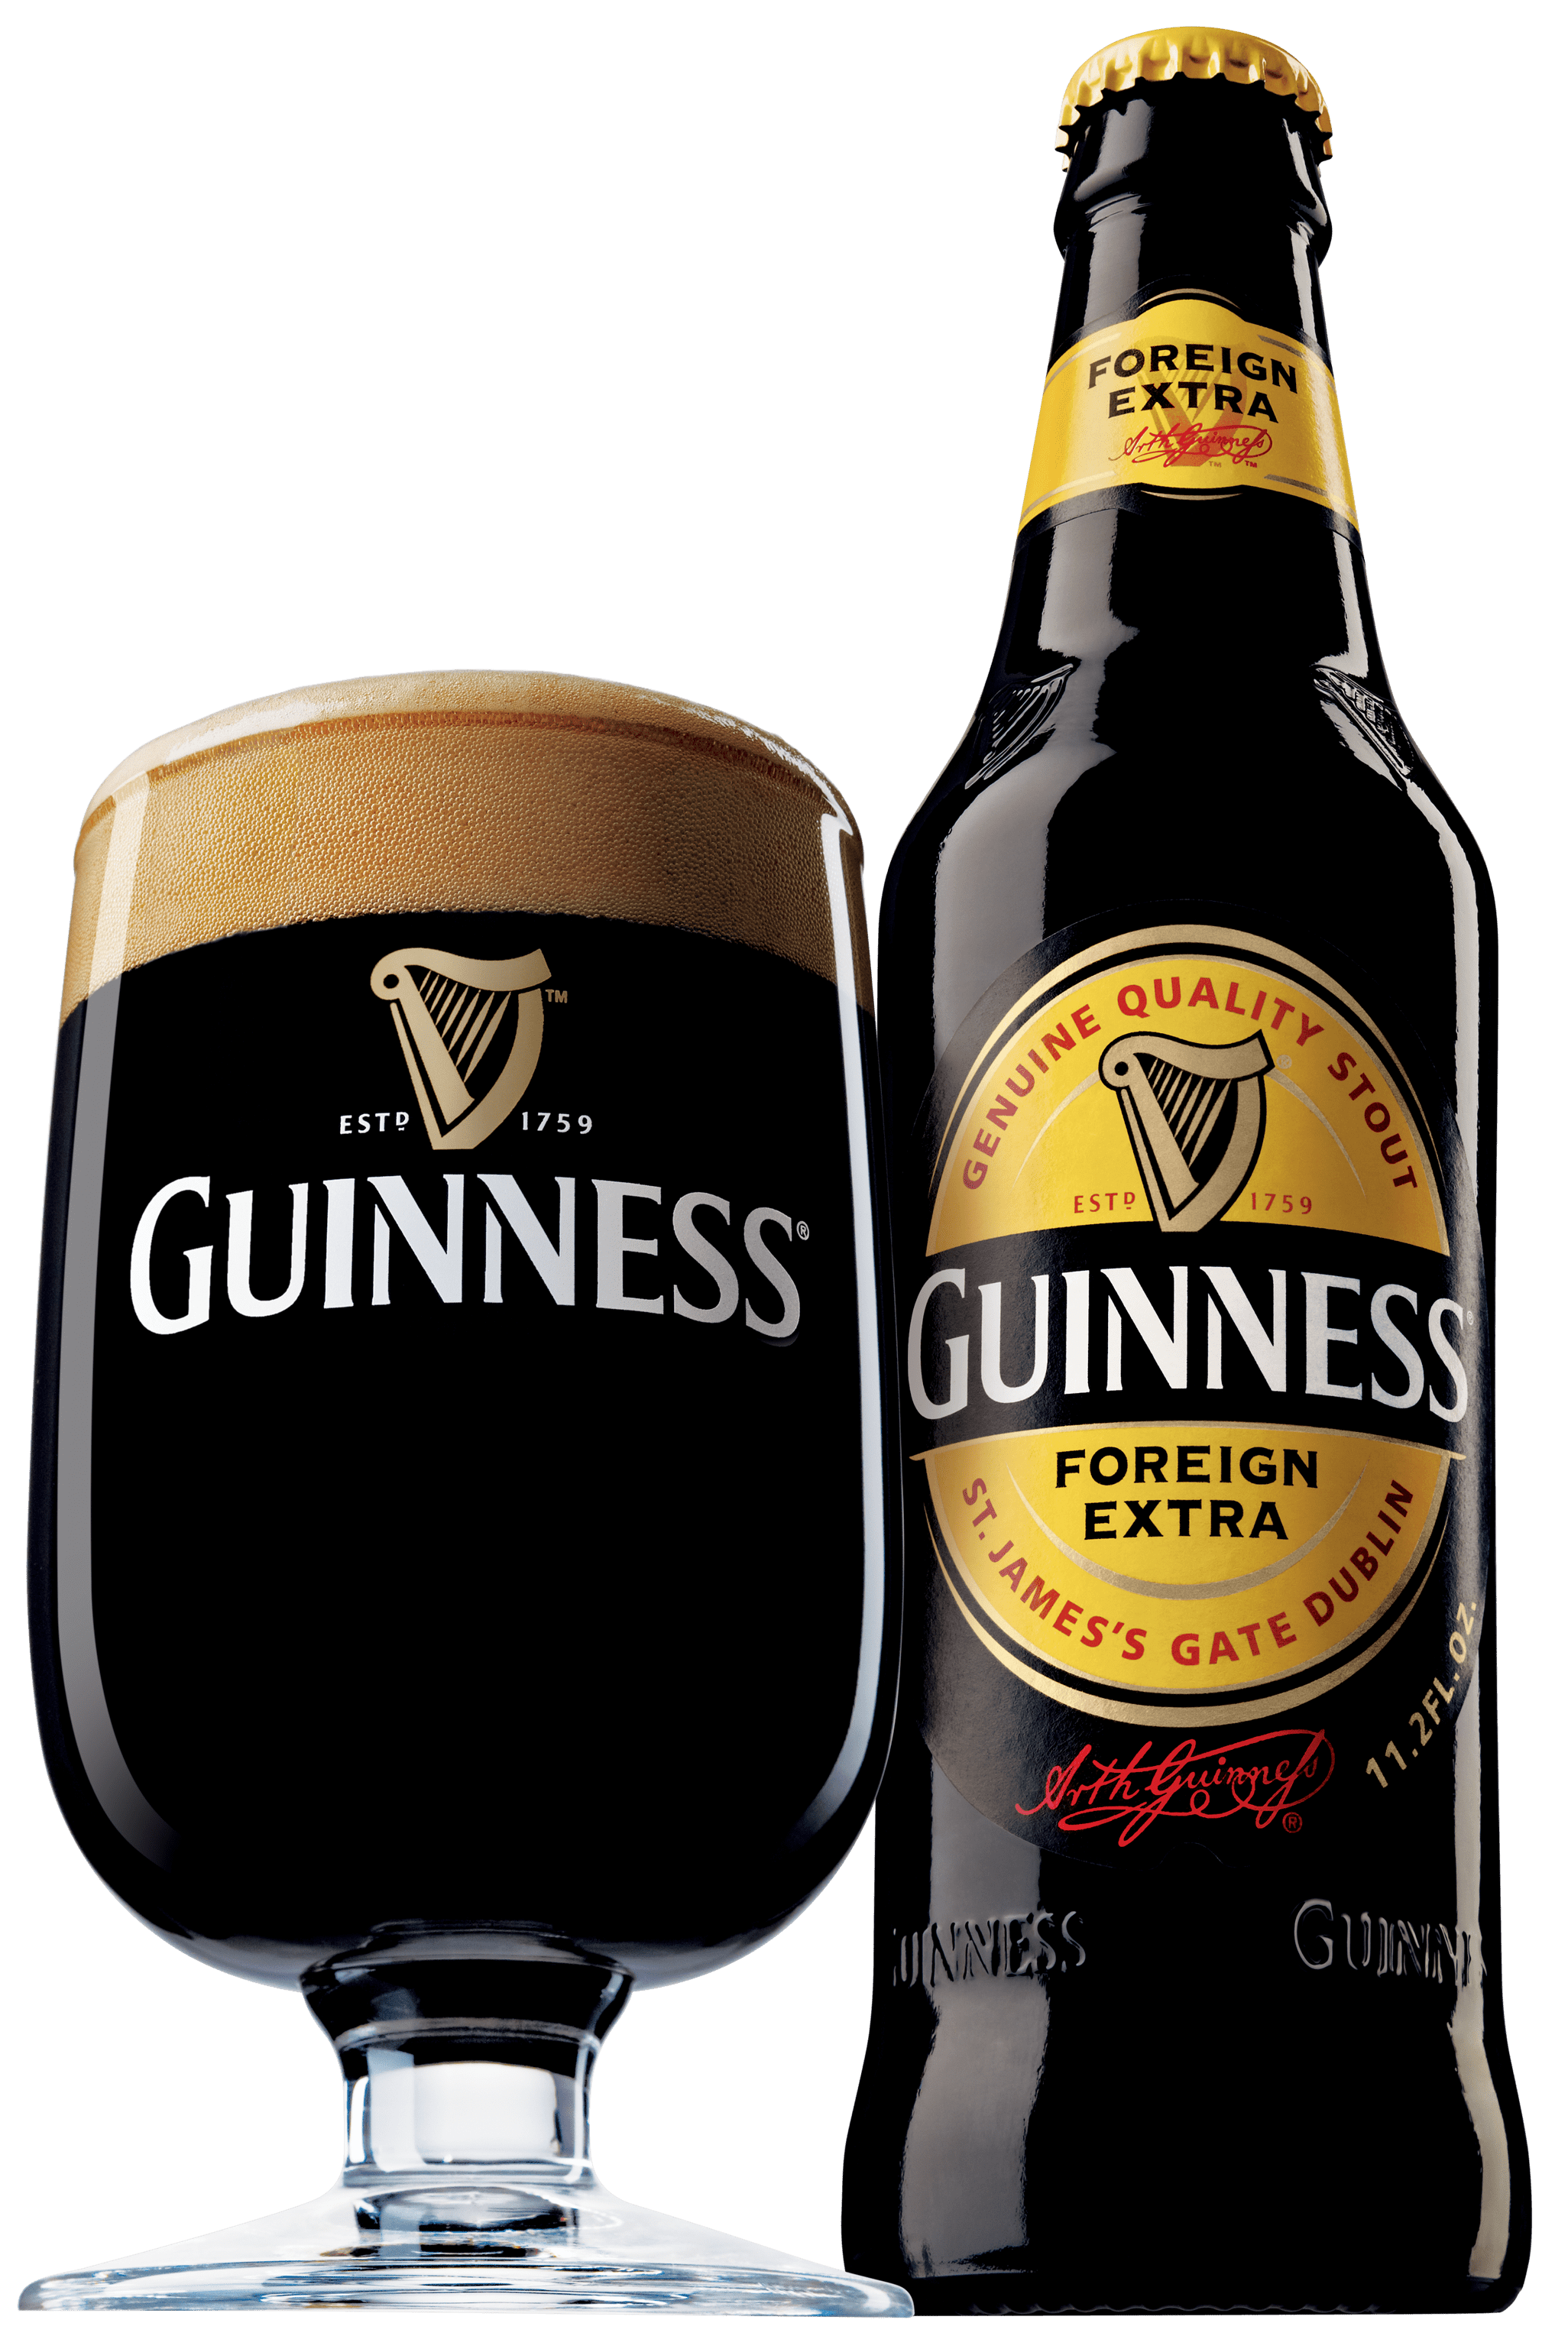 free guinness beer clipart - photo #5